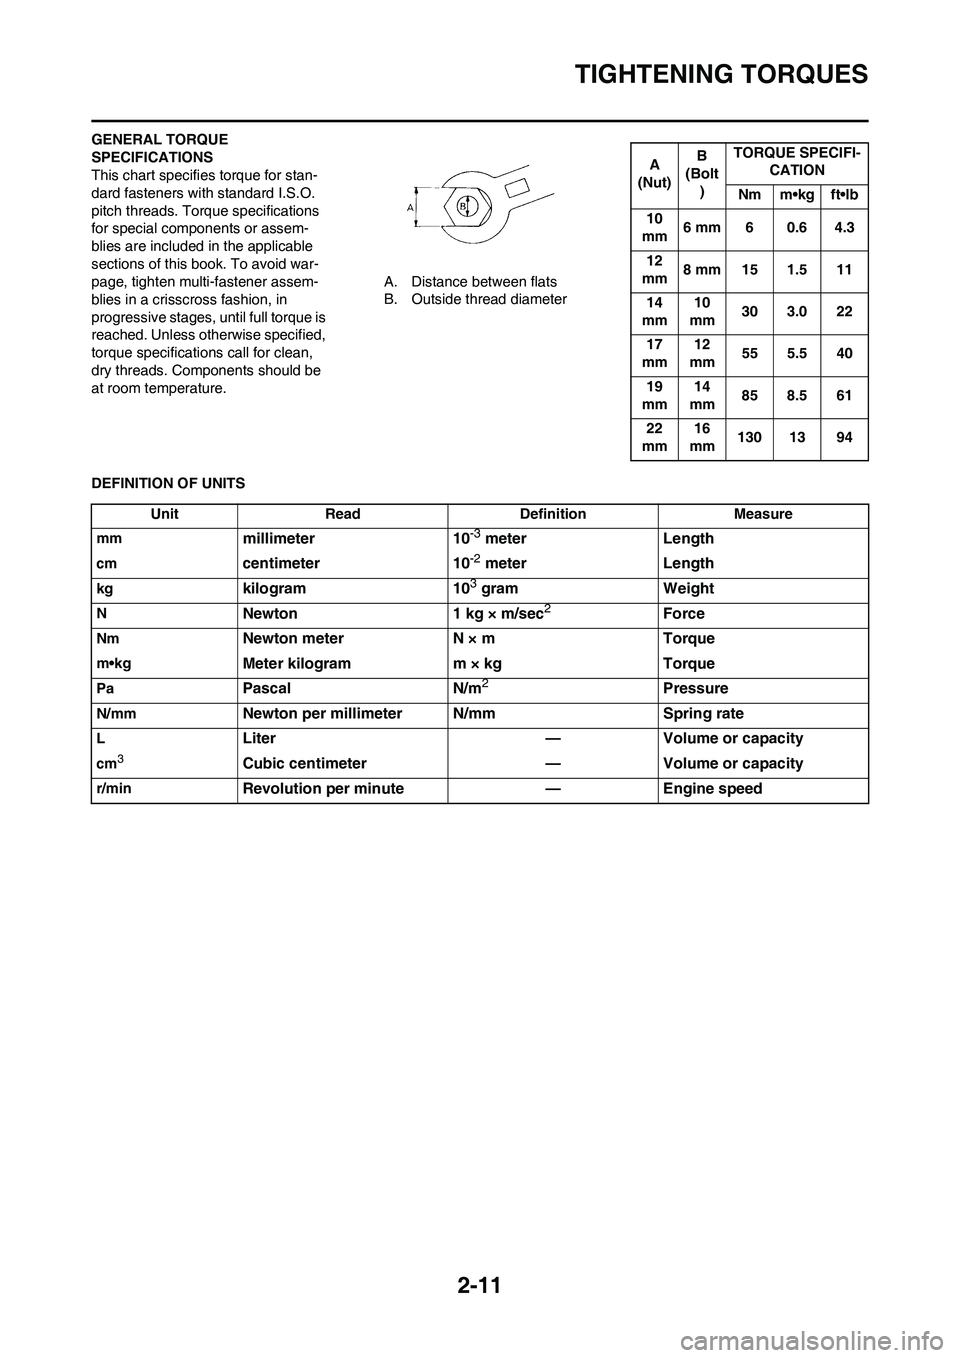 YAMAHA YZ125LC 2010 User Guide 2-11
TIGHTENING TORQUES
GENERAL TORQUE 
SPECIFICATIONS
This chart specifies torque for stan-
dard fasteners with standard I.S.O. 
pitch threads. Torque specifications 
for special components or assem-